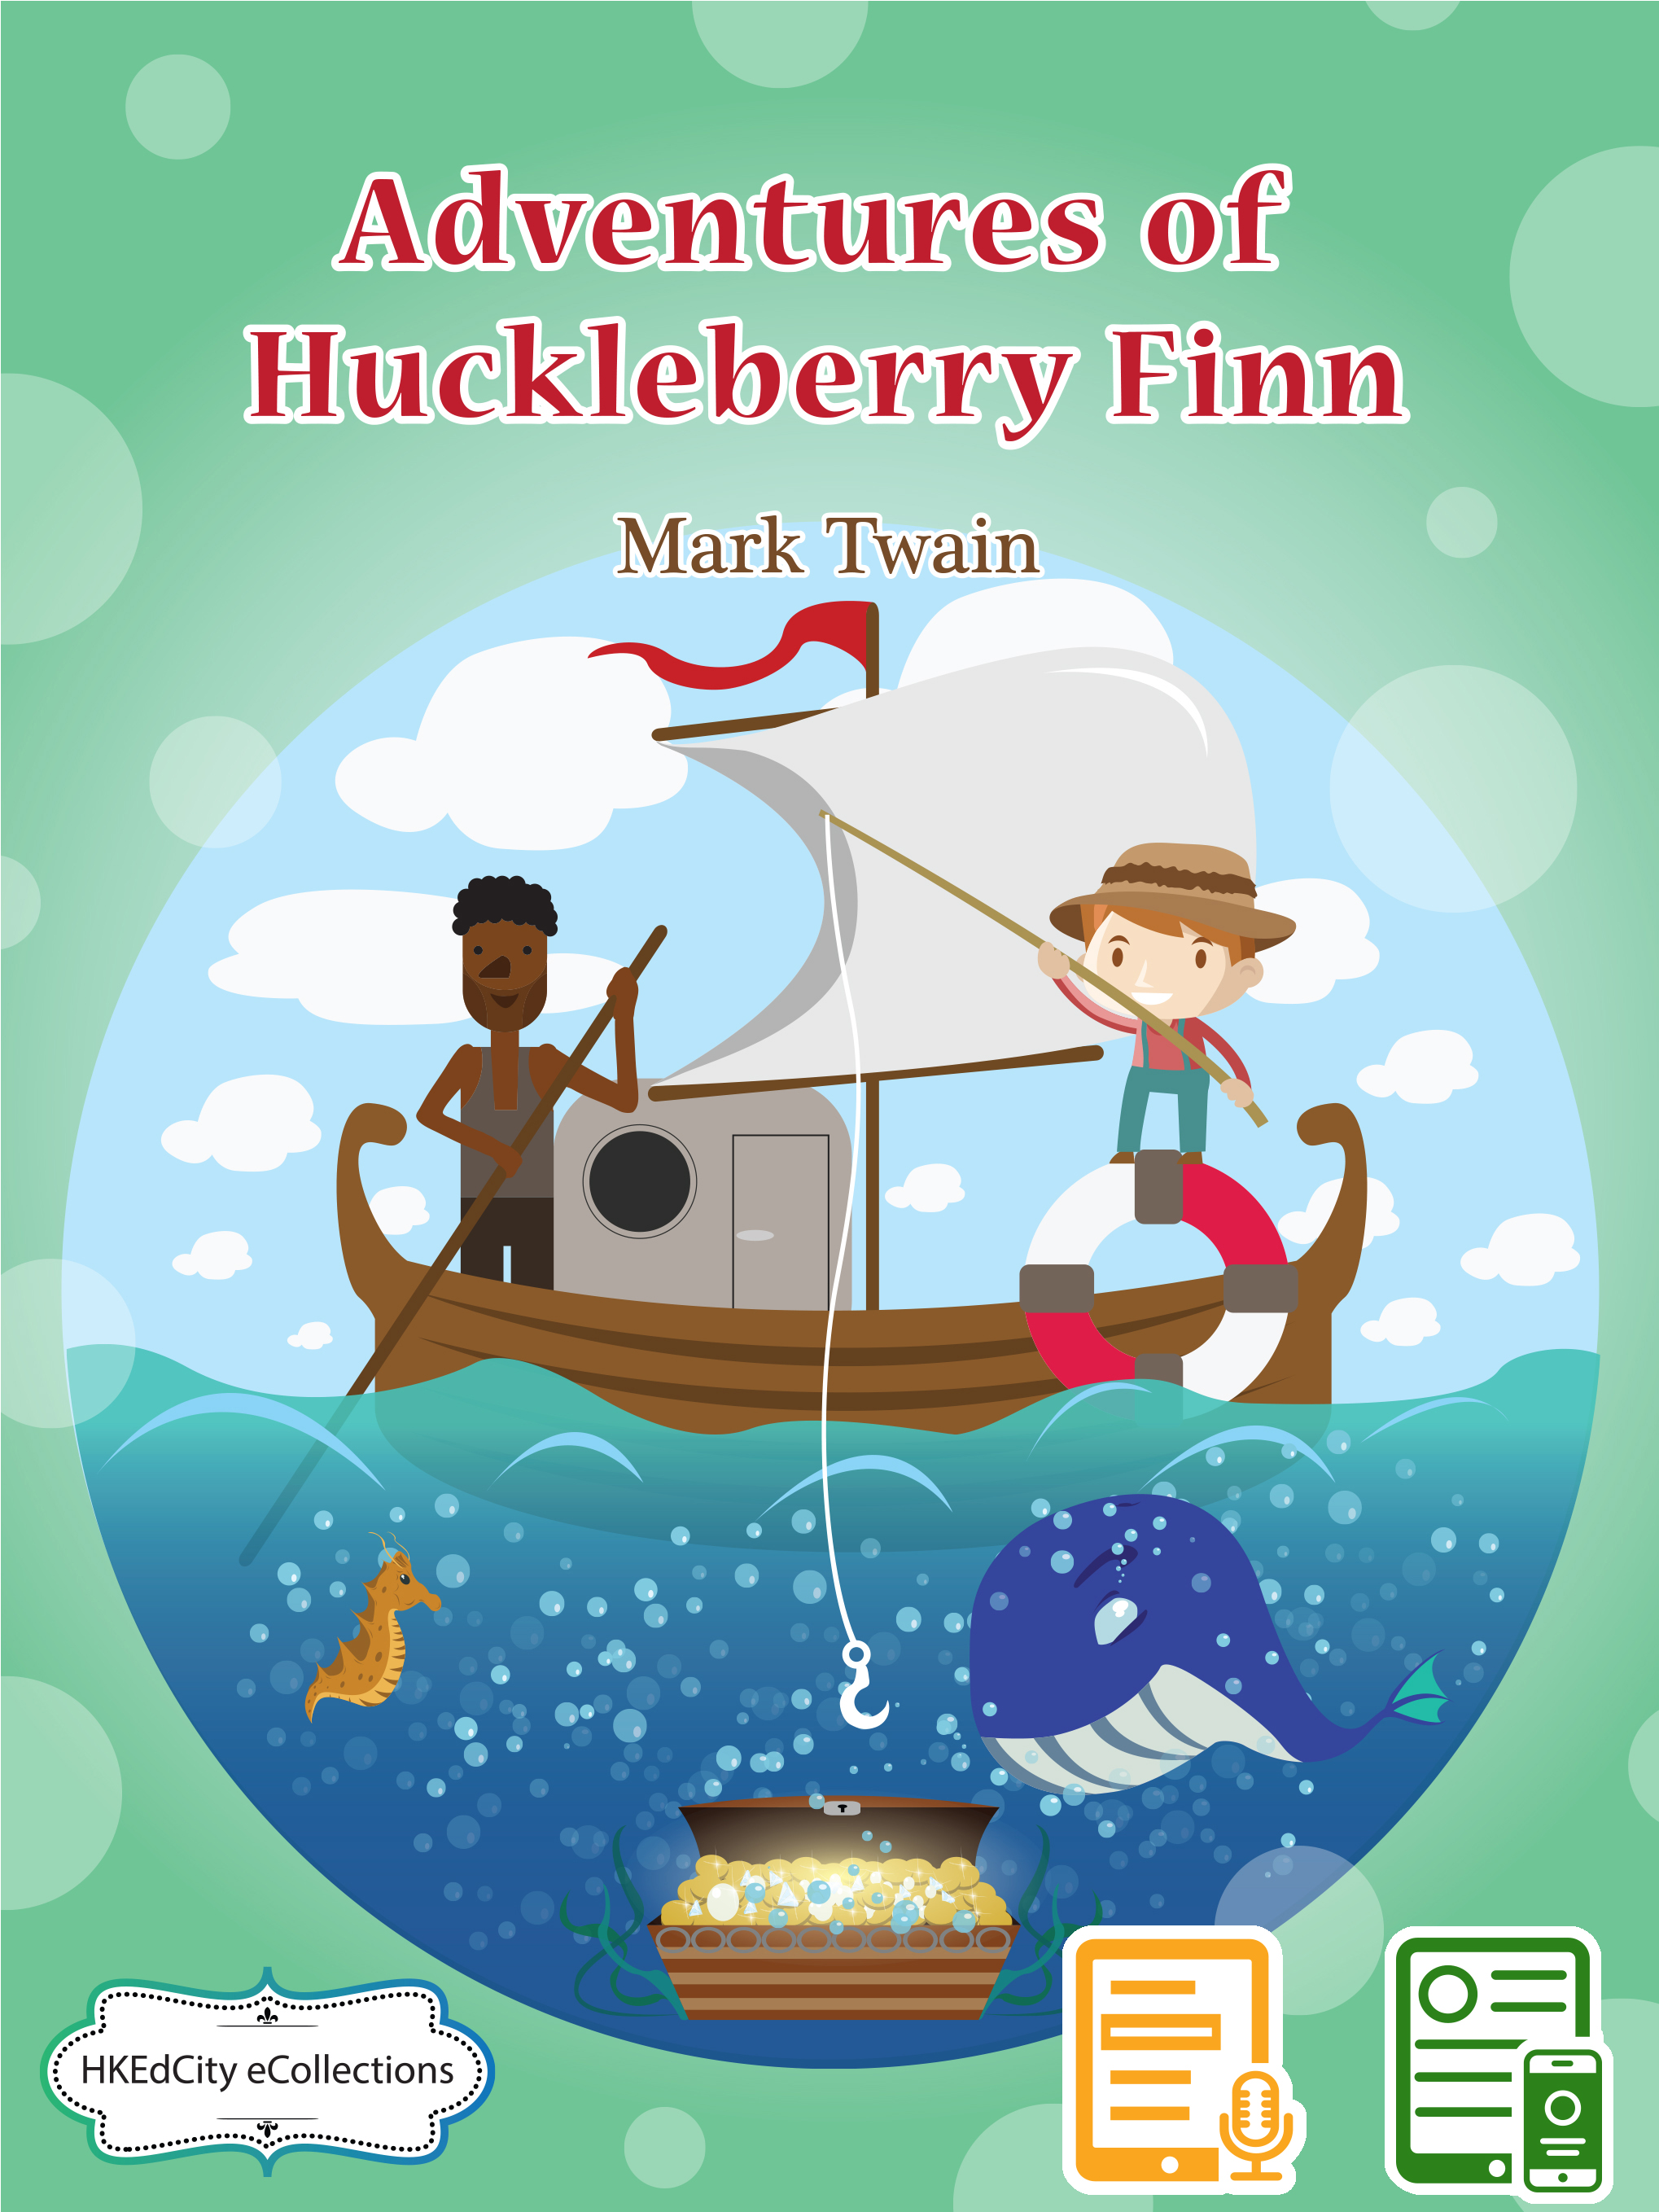 download the new version for windows The Adventures of Huckleberry Finn